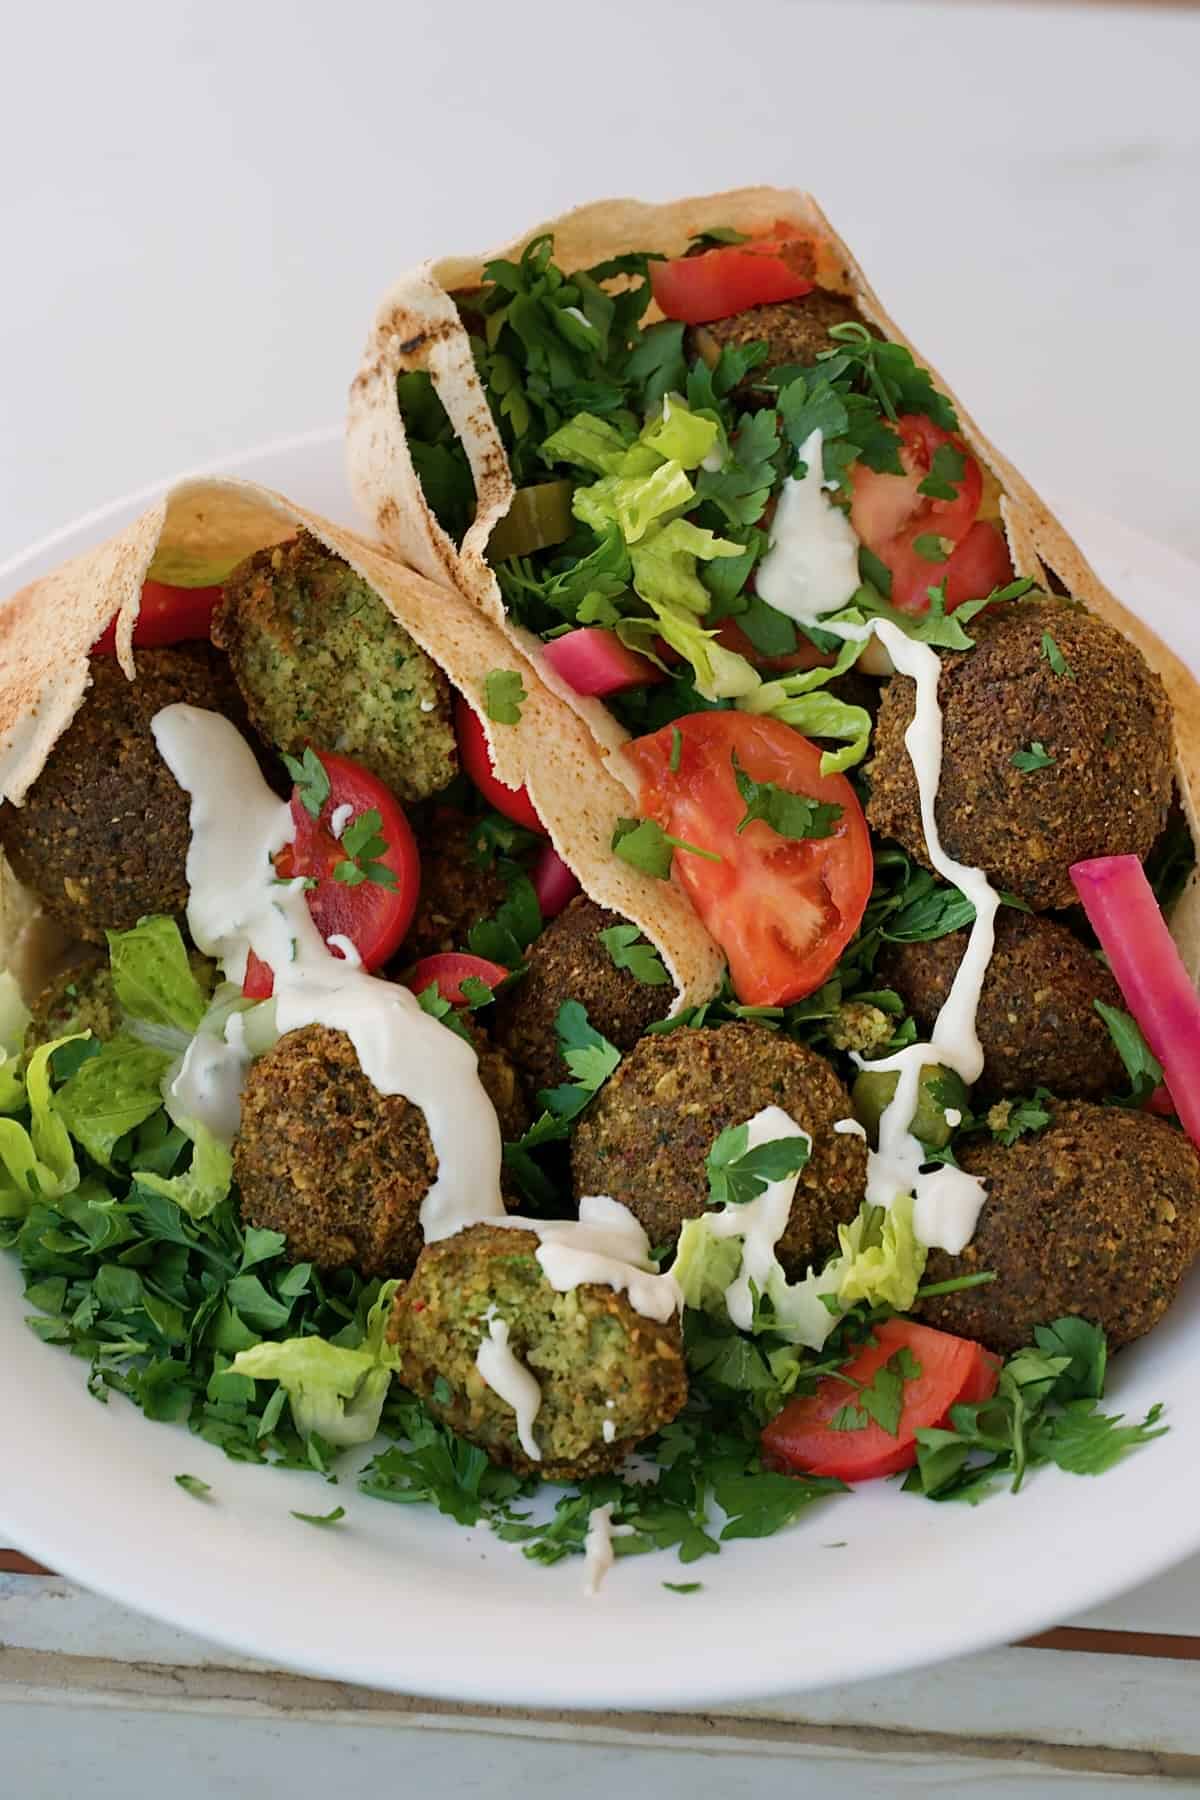 A meal made of falafel and veggies